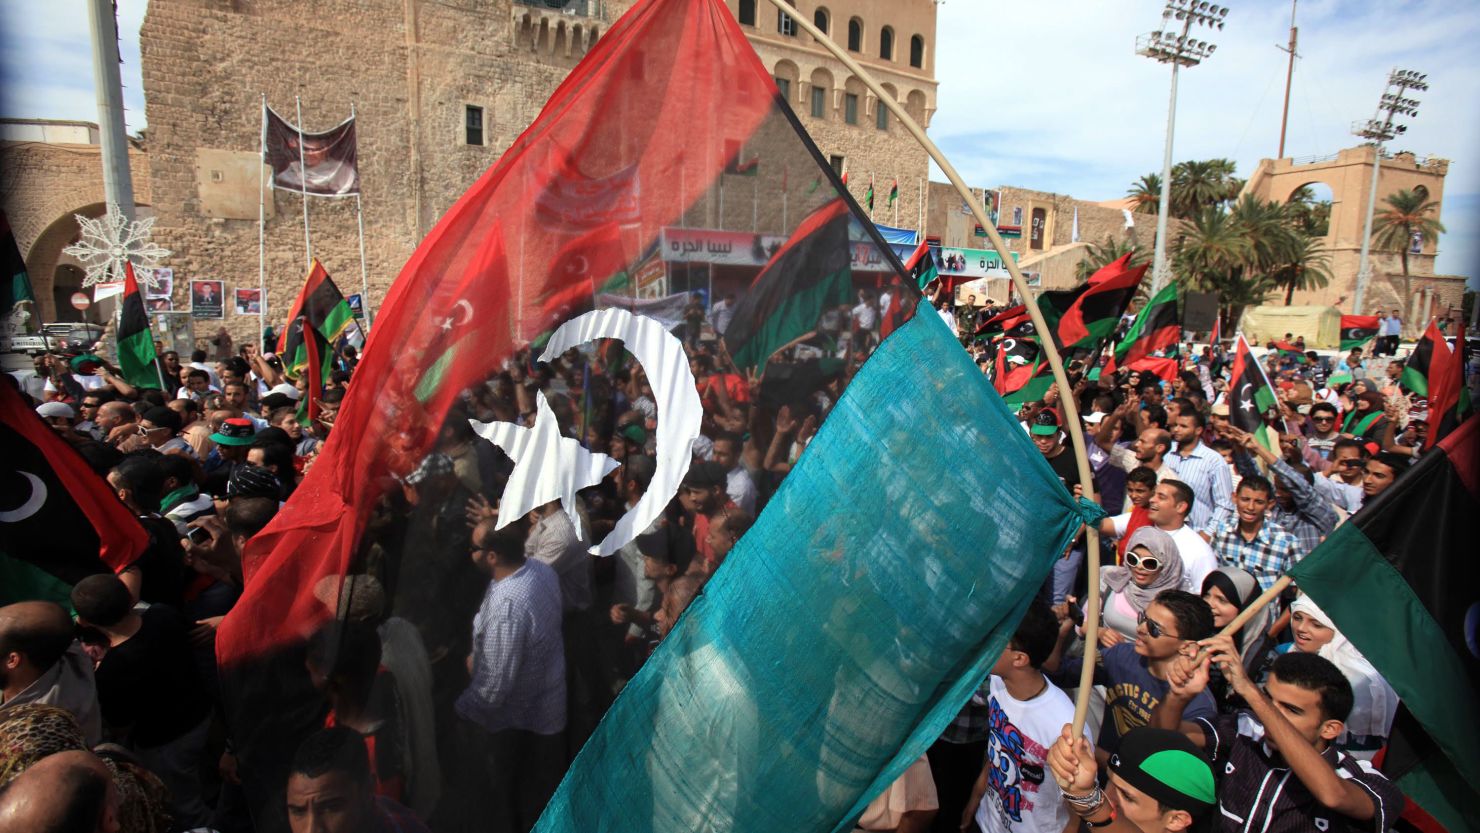 Libyans celebrate in the streets of Tripoli on Thursday. Isobel Coleman says it is unclear who will lead the country.